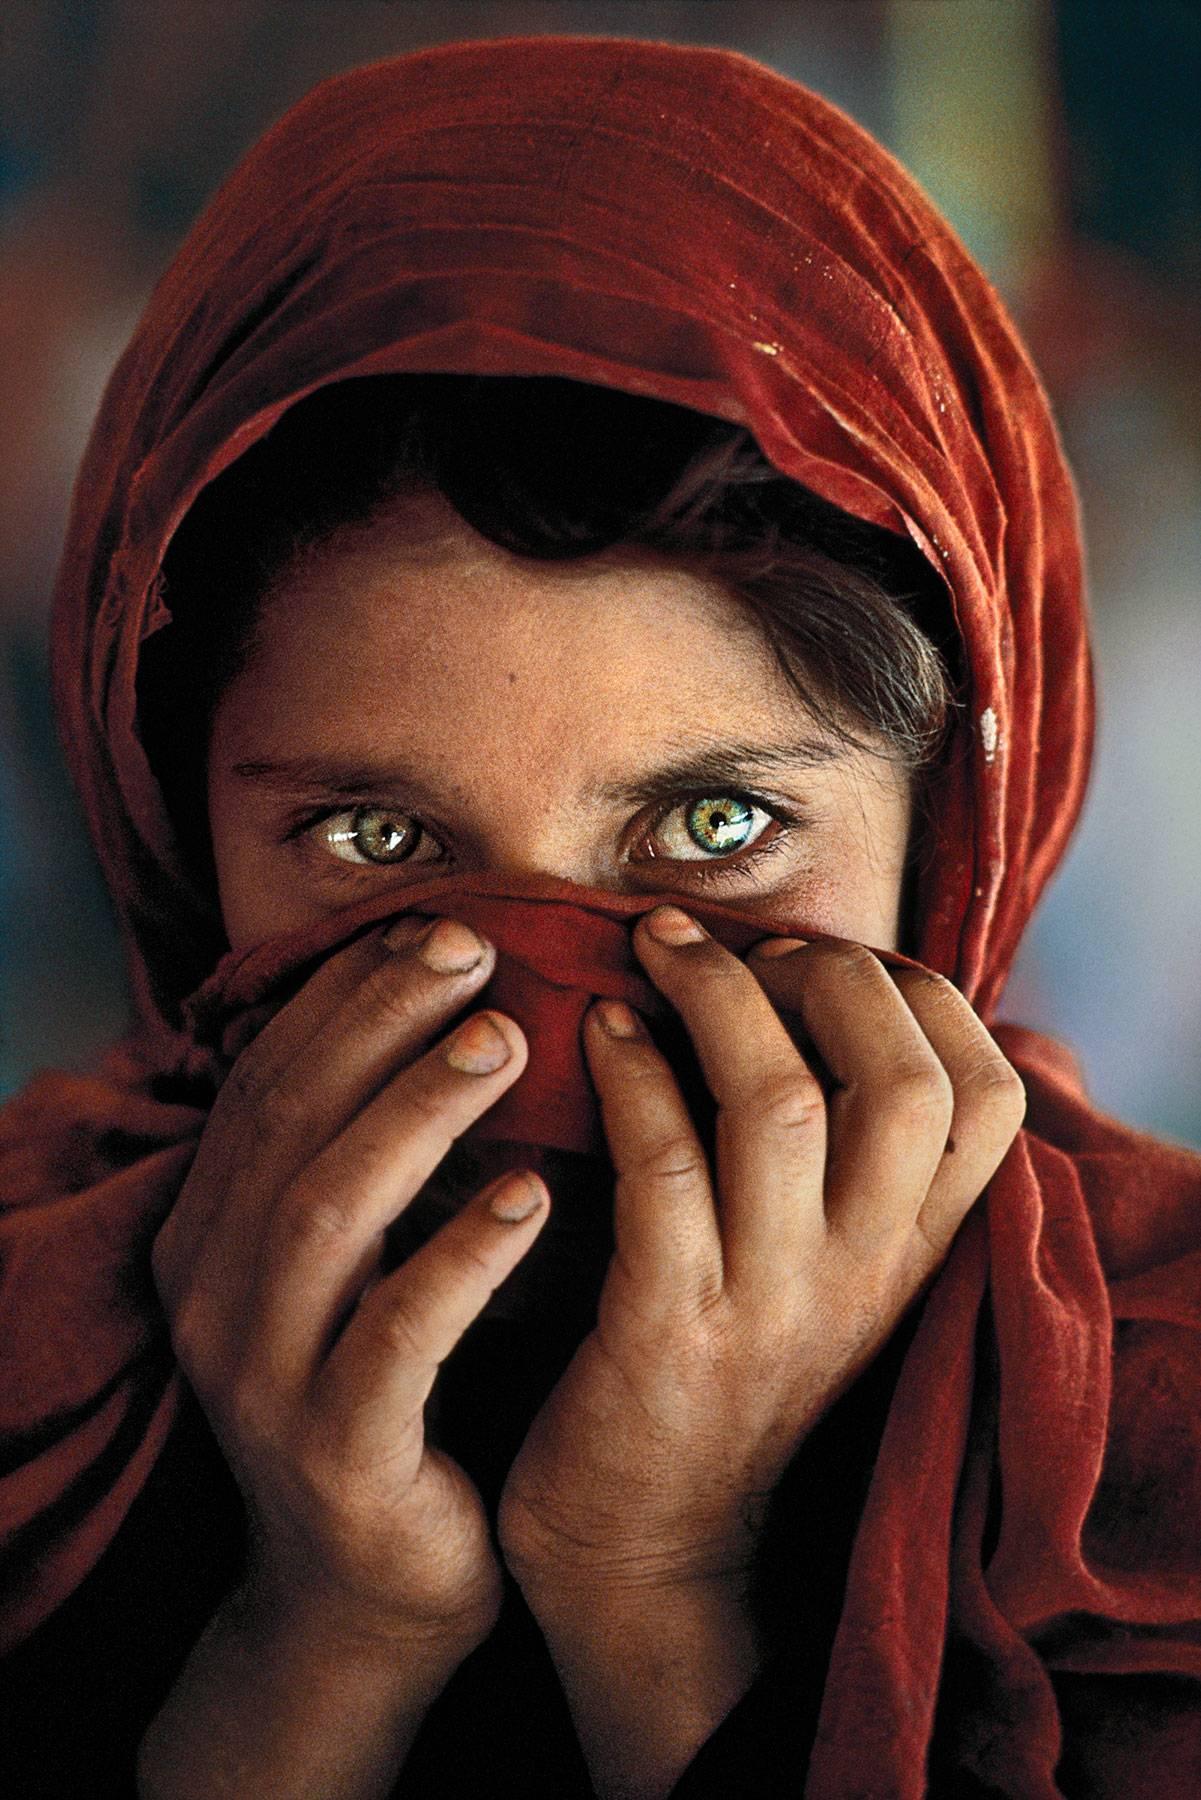 Steve McCurry Color Photograph - Afghan Girl with Hands on Face